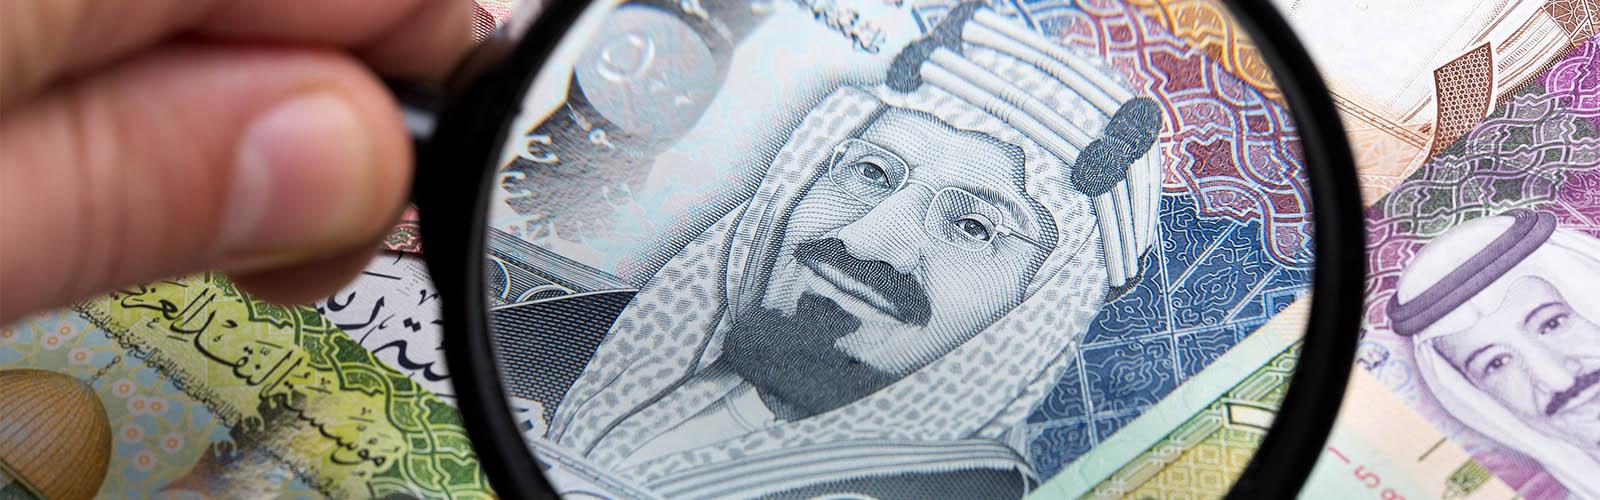 Saudi Arabia: The Rapidly Emerging Investment Hub in the ME